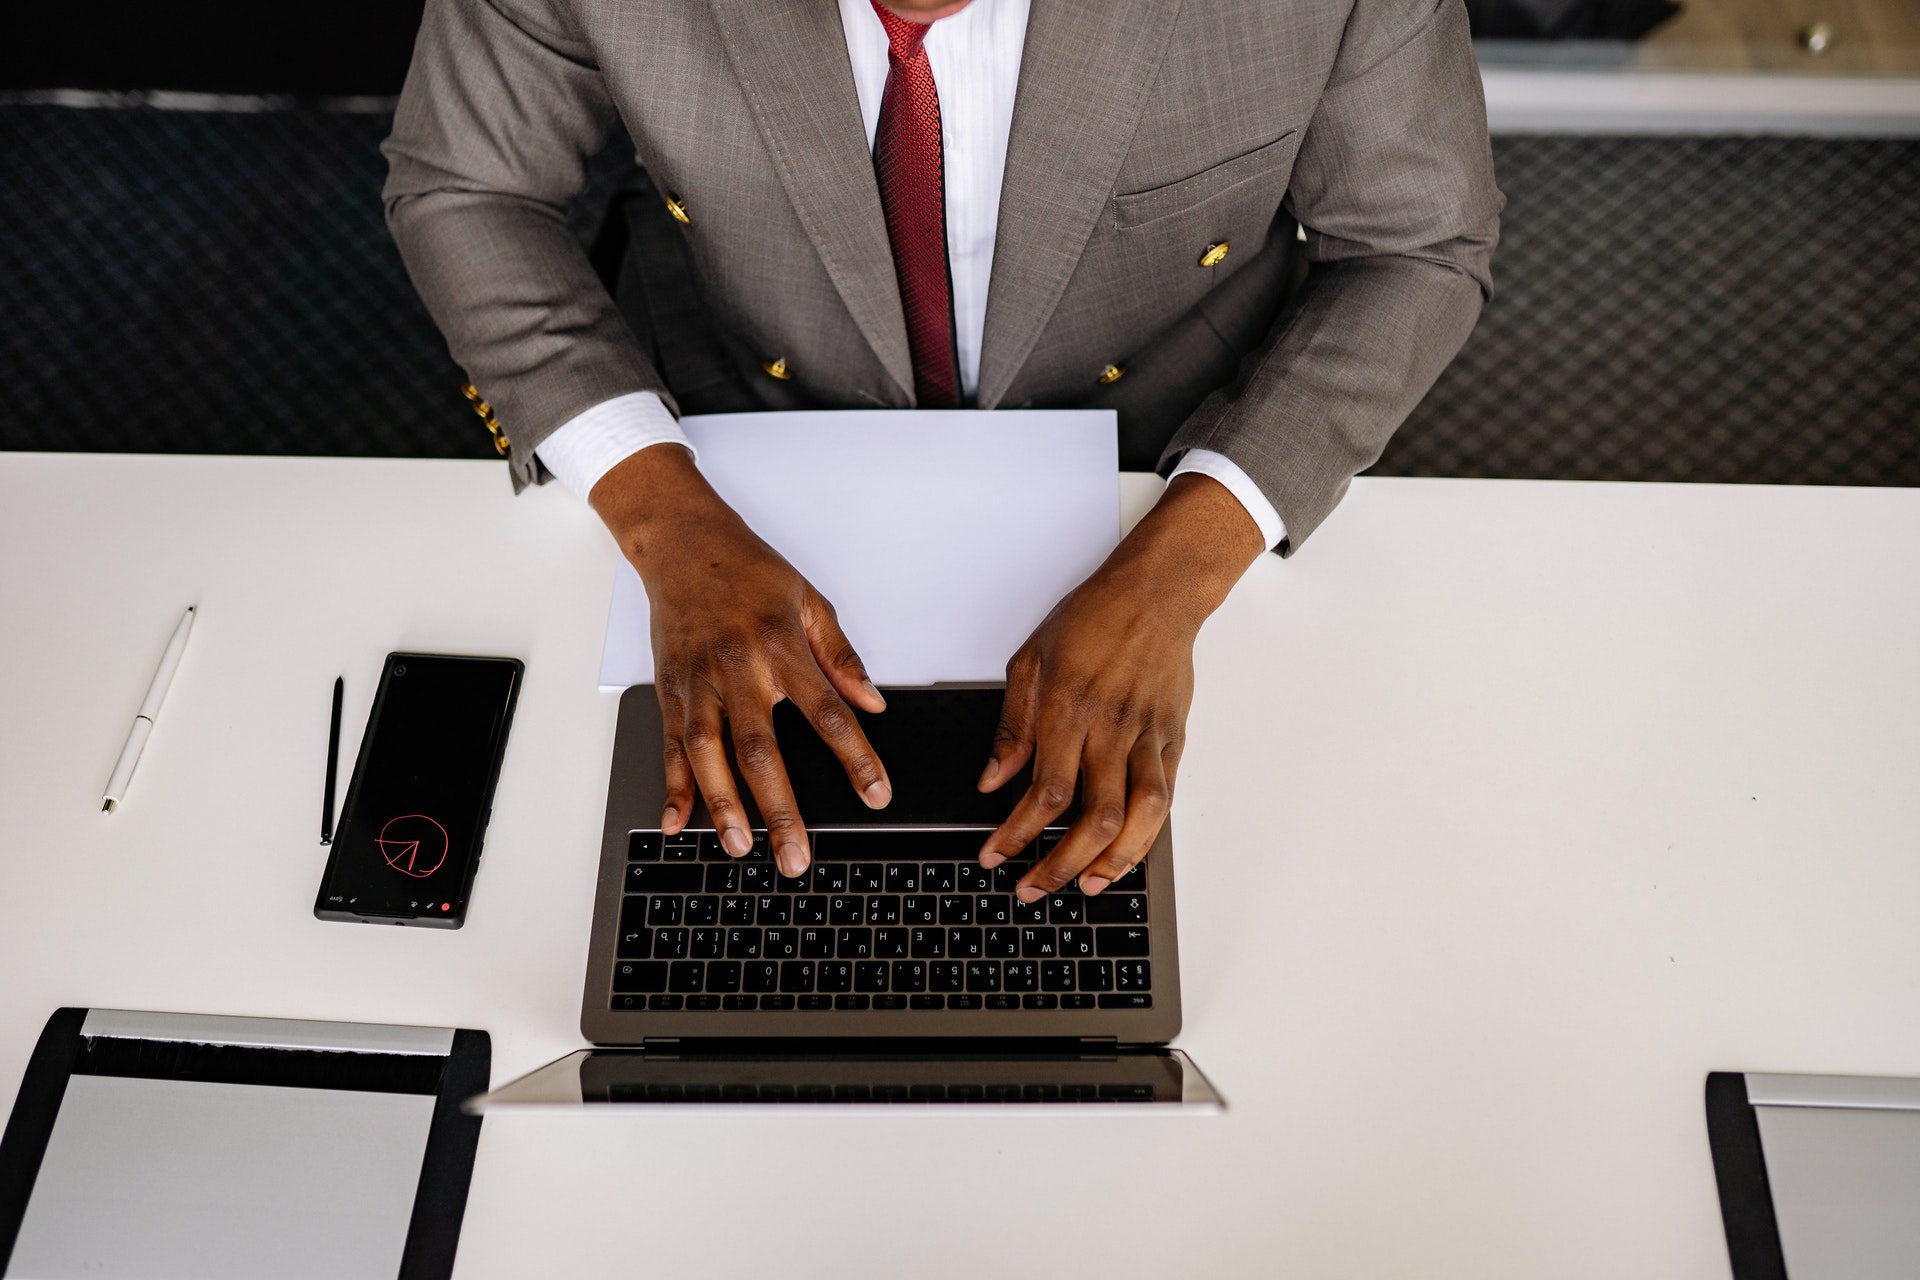 Man in a gray suit typing on a laptop